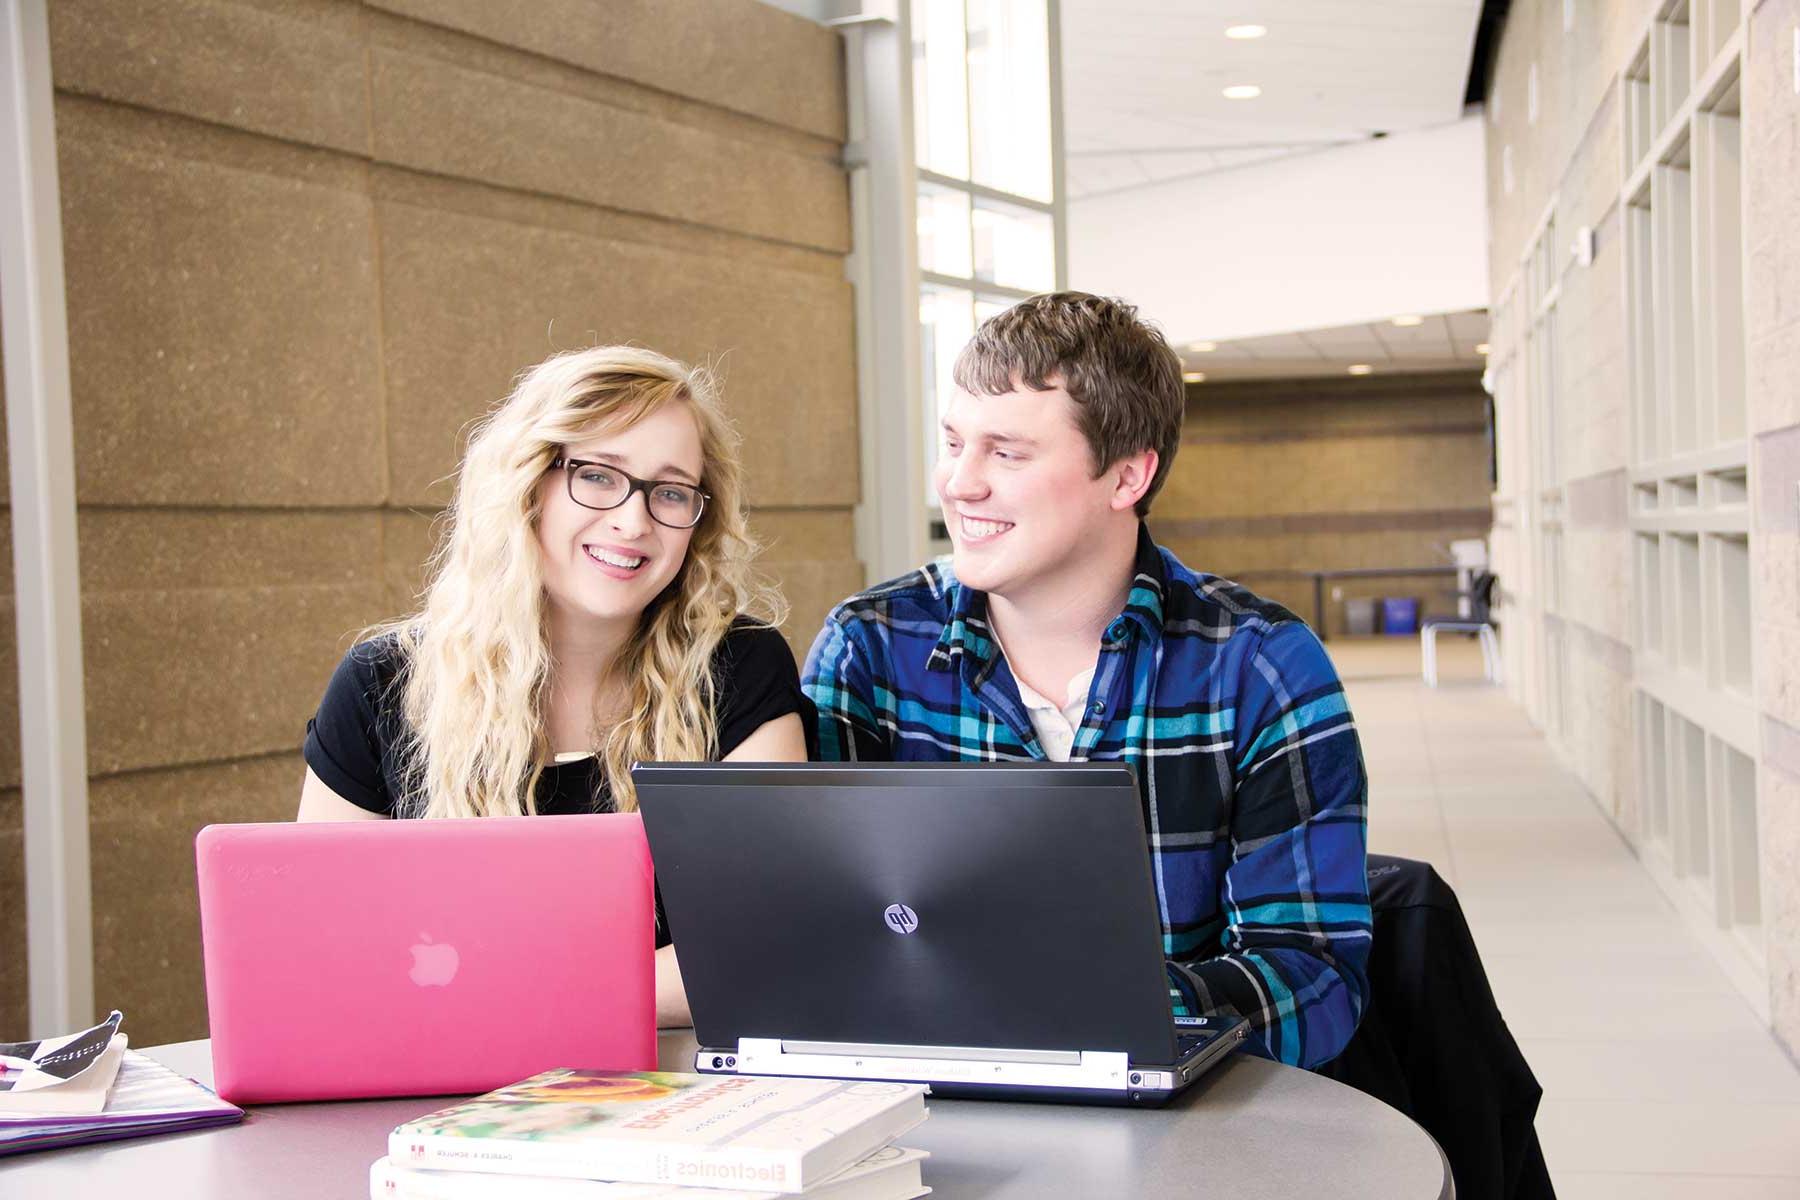 Male and female students with laptops